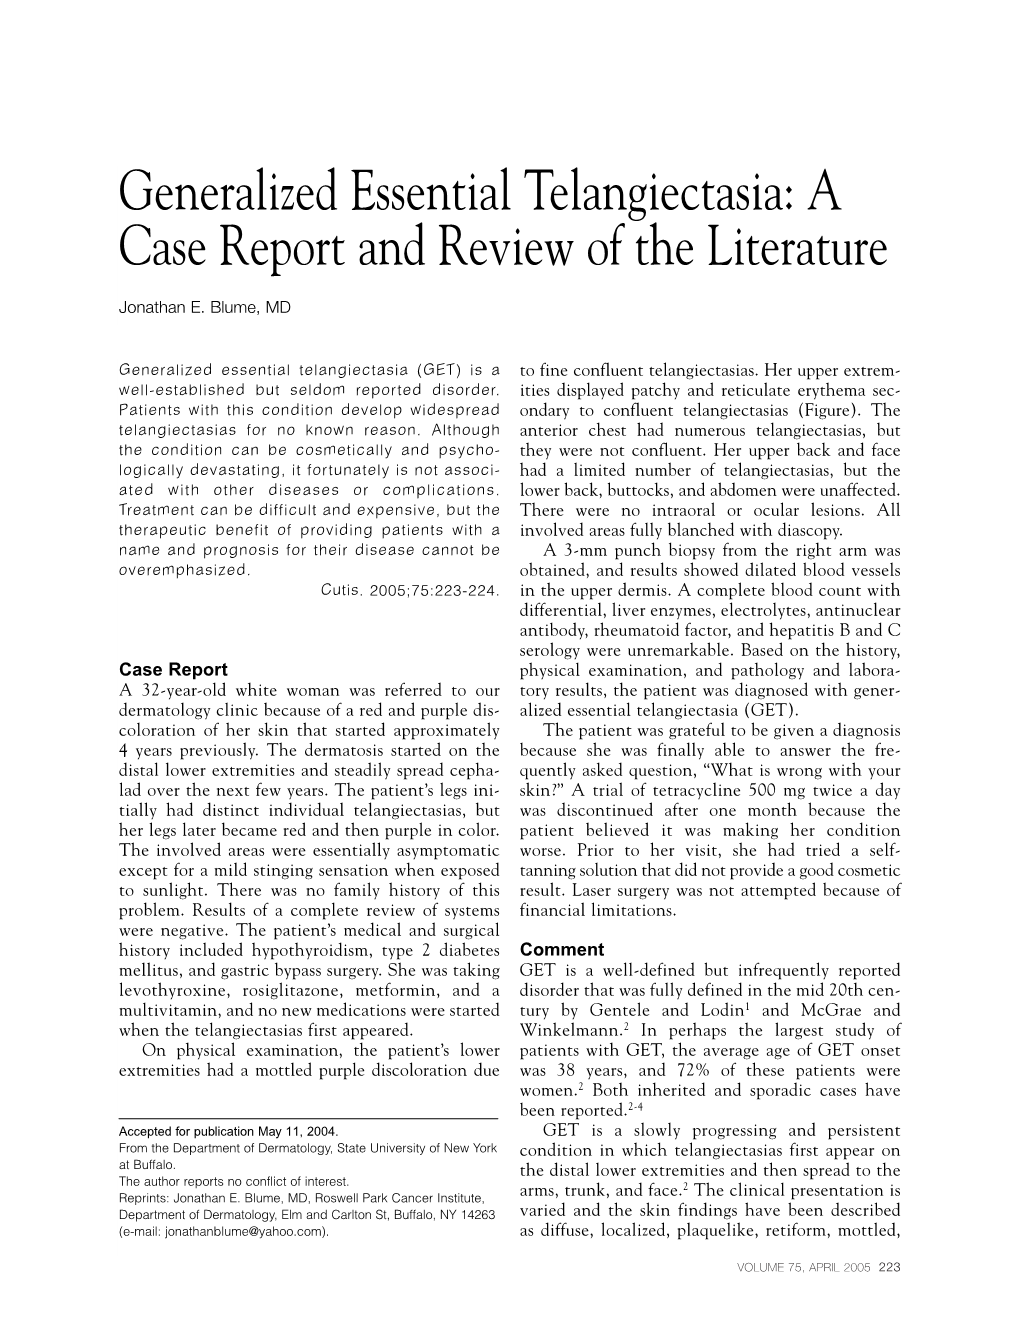 Generalized Essential Telangiectasia: a Case Report and Review of the Literature